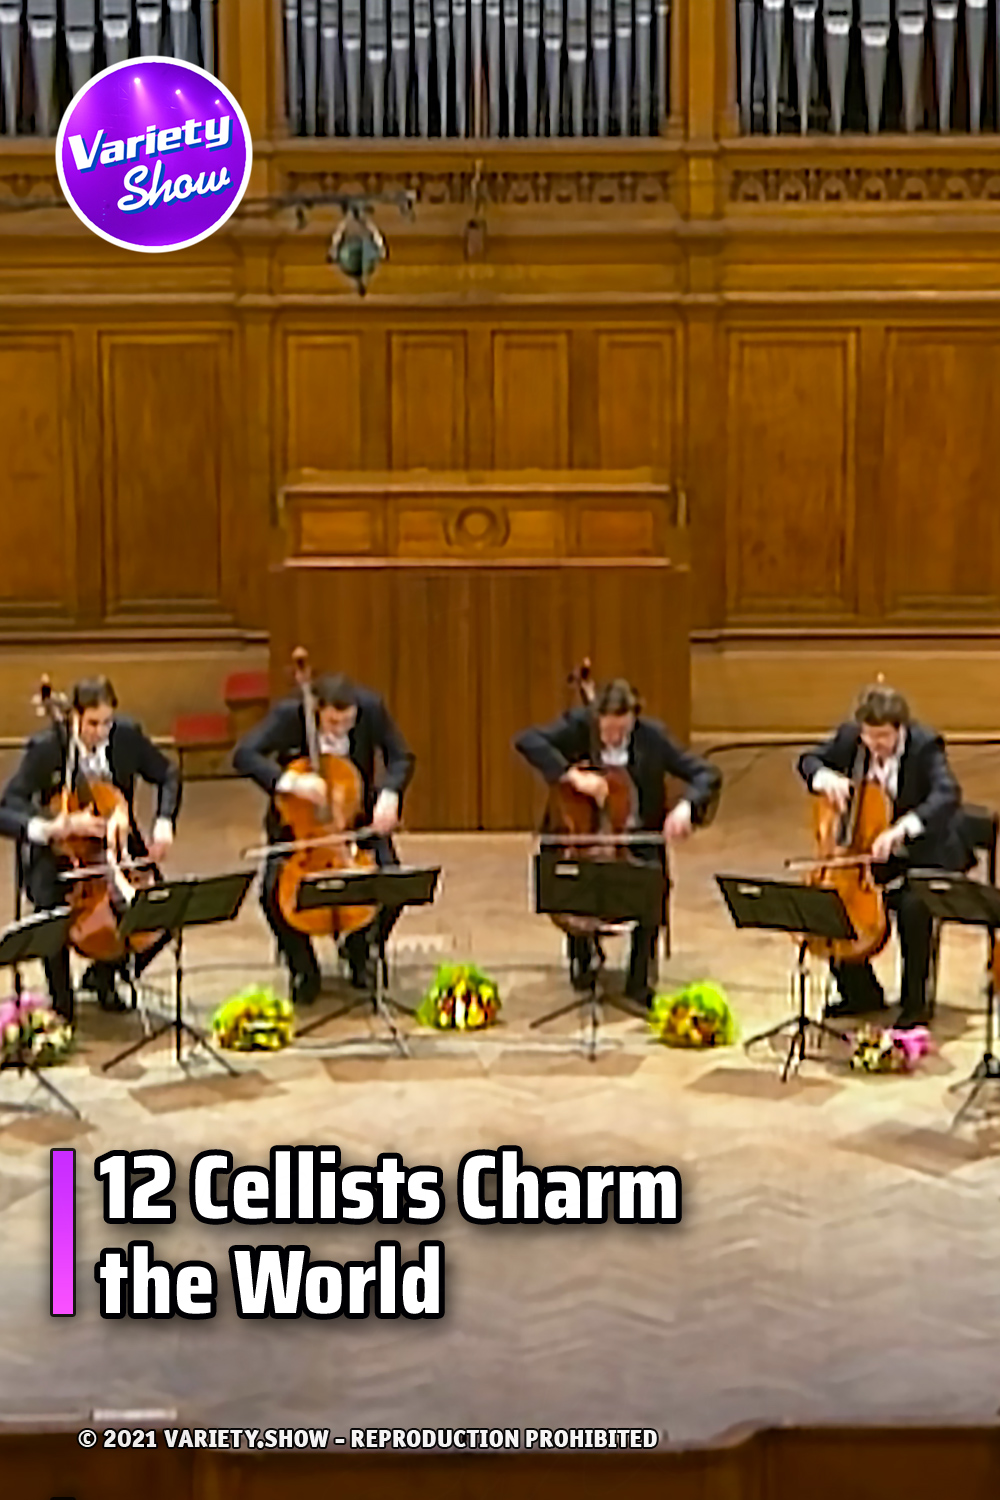 12 Cellists Charm the World